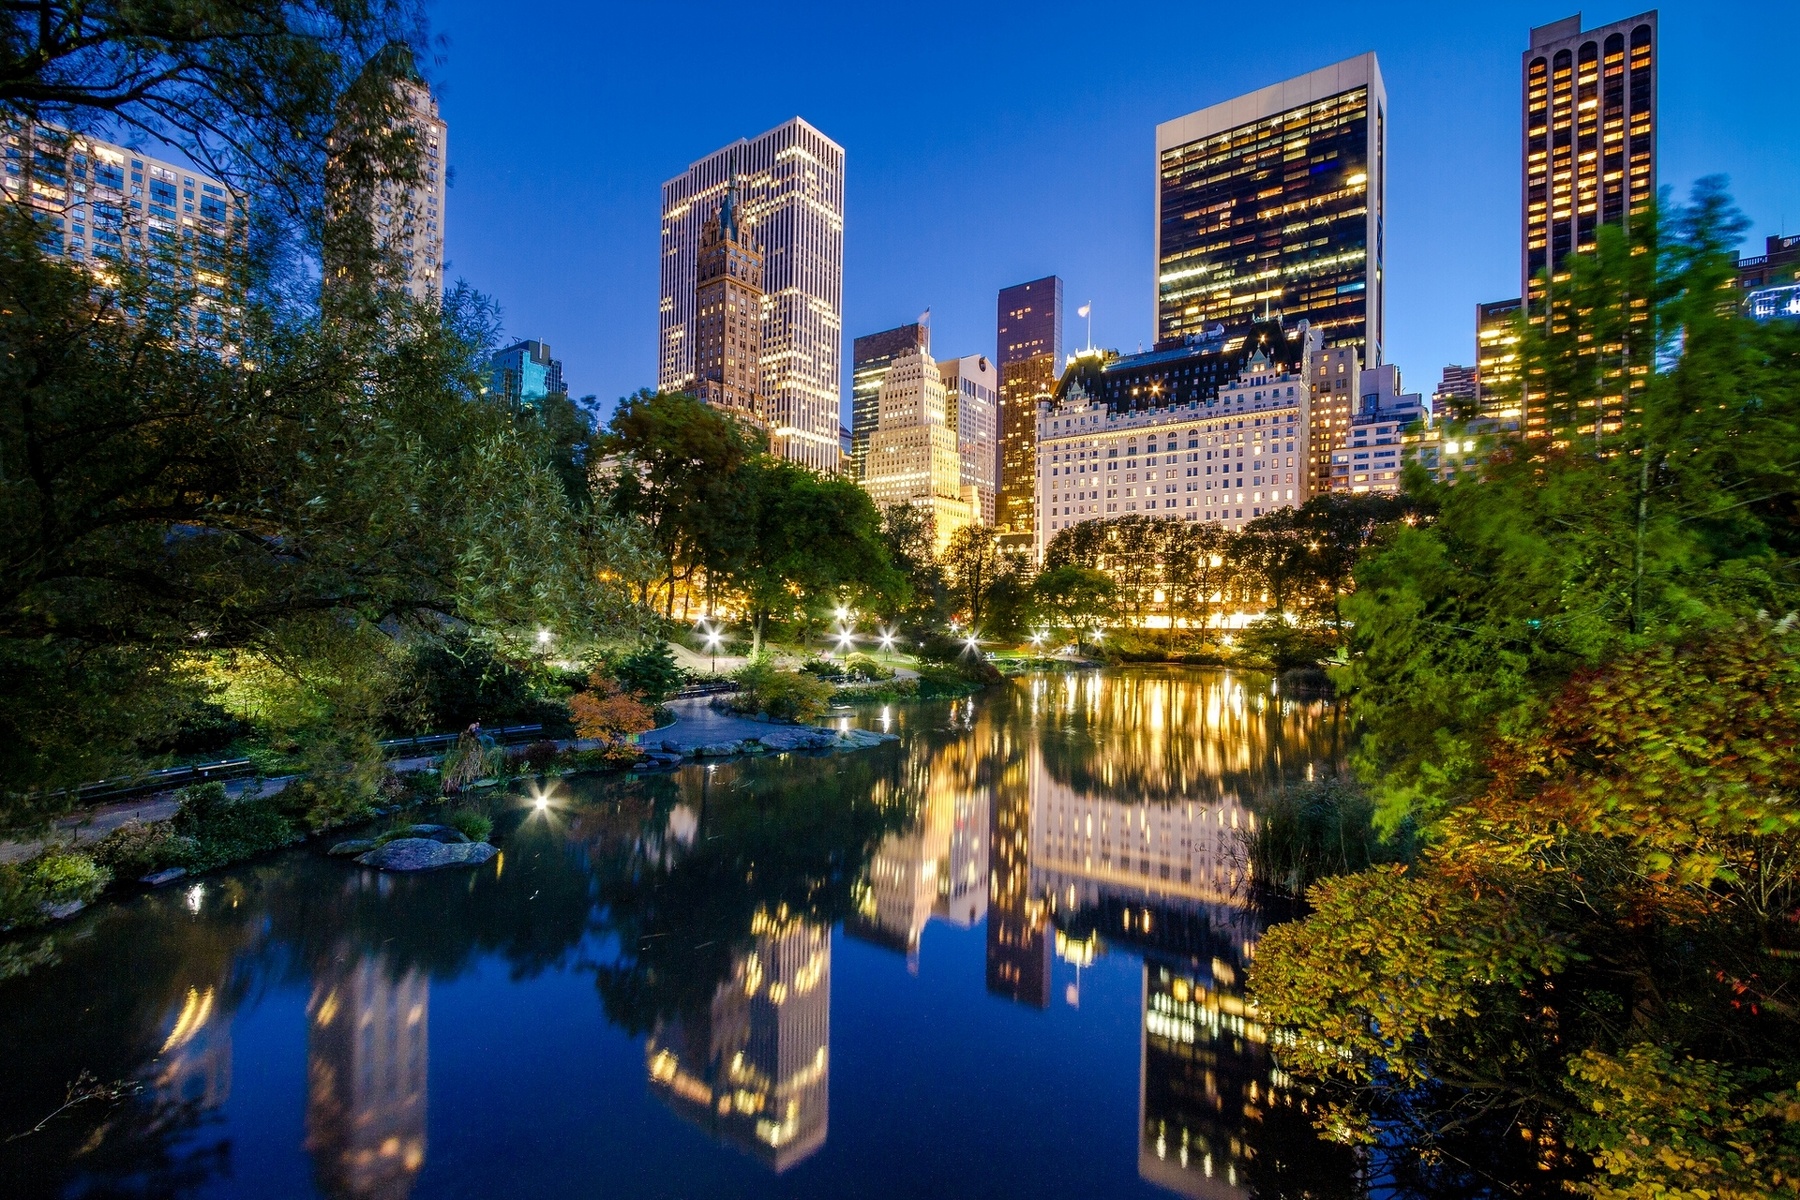 Central park by night.jpg